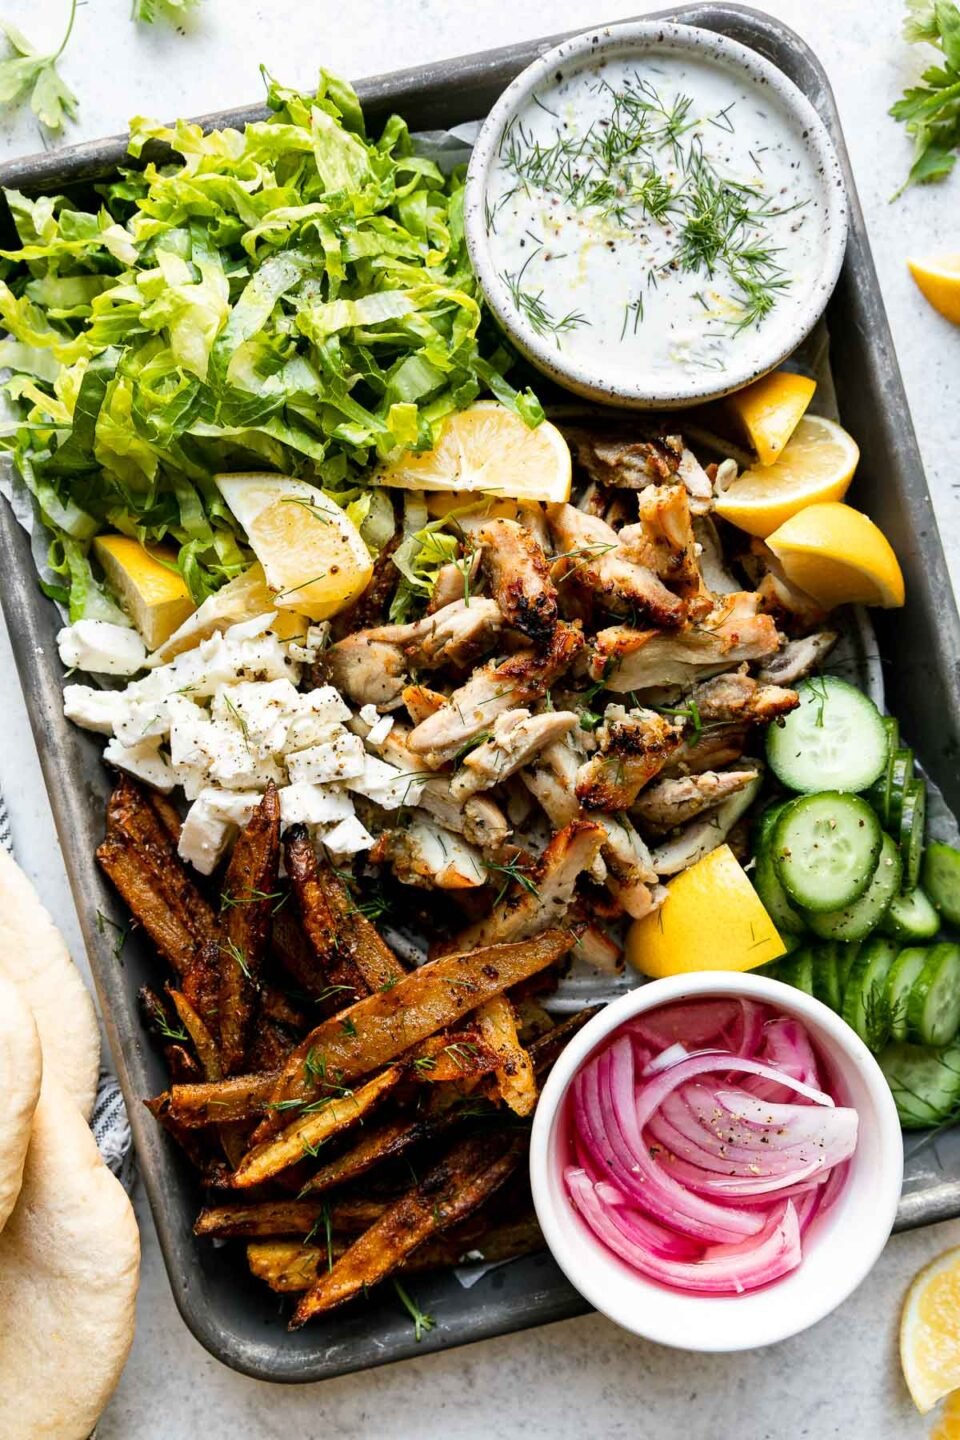 A small baking sheet is filled with all of the fixings to make Lemony Greek Chicken Pitas: shredded lettuce, sliced cucumber, oven-roasted Greek fries, sliced lemony Greek chicken, crumbled feta, lemon wedges, a bowl filled with tzatziki-ish herbed yogurt sauce, and a small pinch bowl filled with pickled red onions. Warm pitas rest alongside the sheet pan wrapped in a blue and white striped linen napkin along with lemon wedges and loose fresh herbs that surround the baking sheet. All items rest atop a creamy white textured surface.